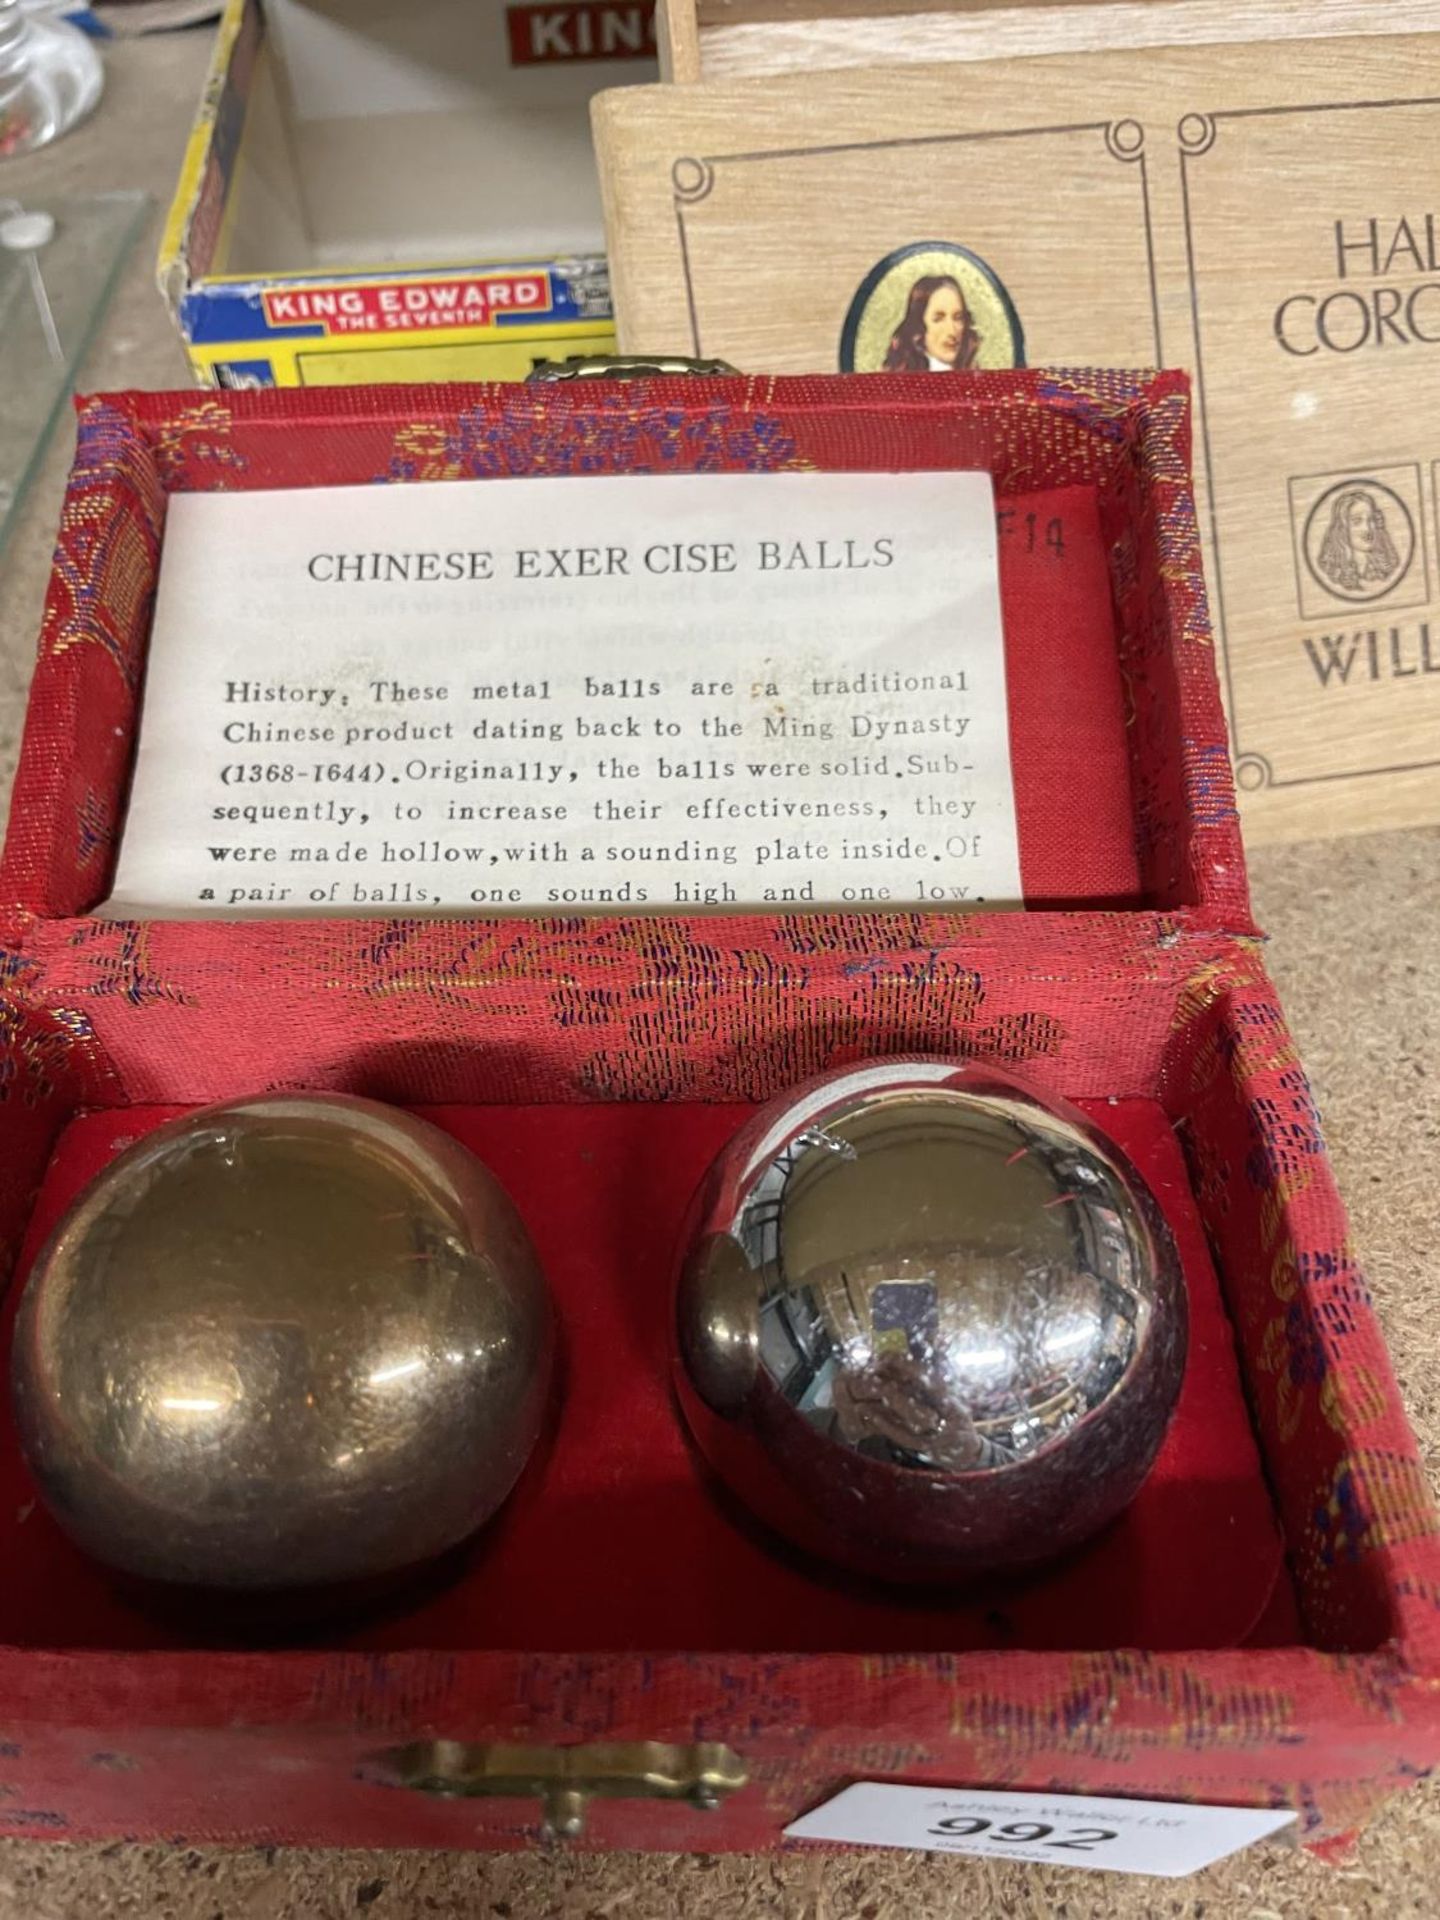 A GLASS CHESS SET WITH BOX, CHINESE EXERCISE BOWLS, WOODEN BOX, GALLILEO THERMOMETER, VINTAGE KING - Image 8 of 12